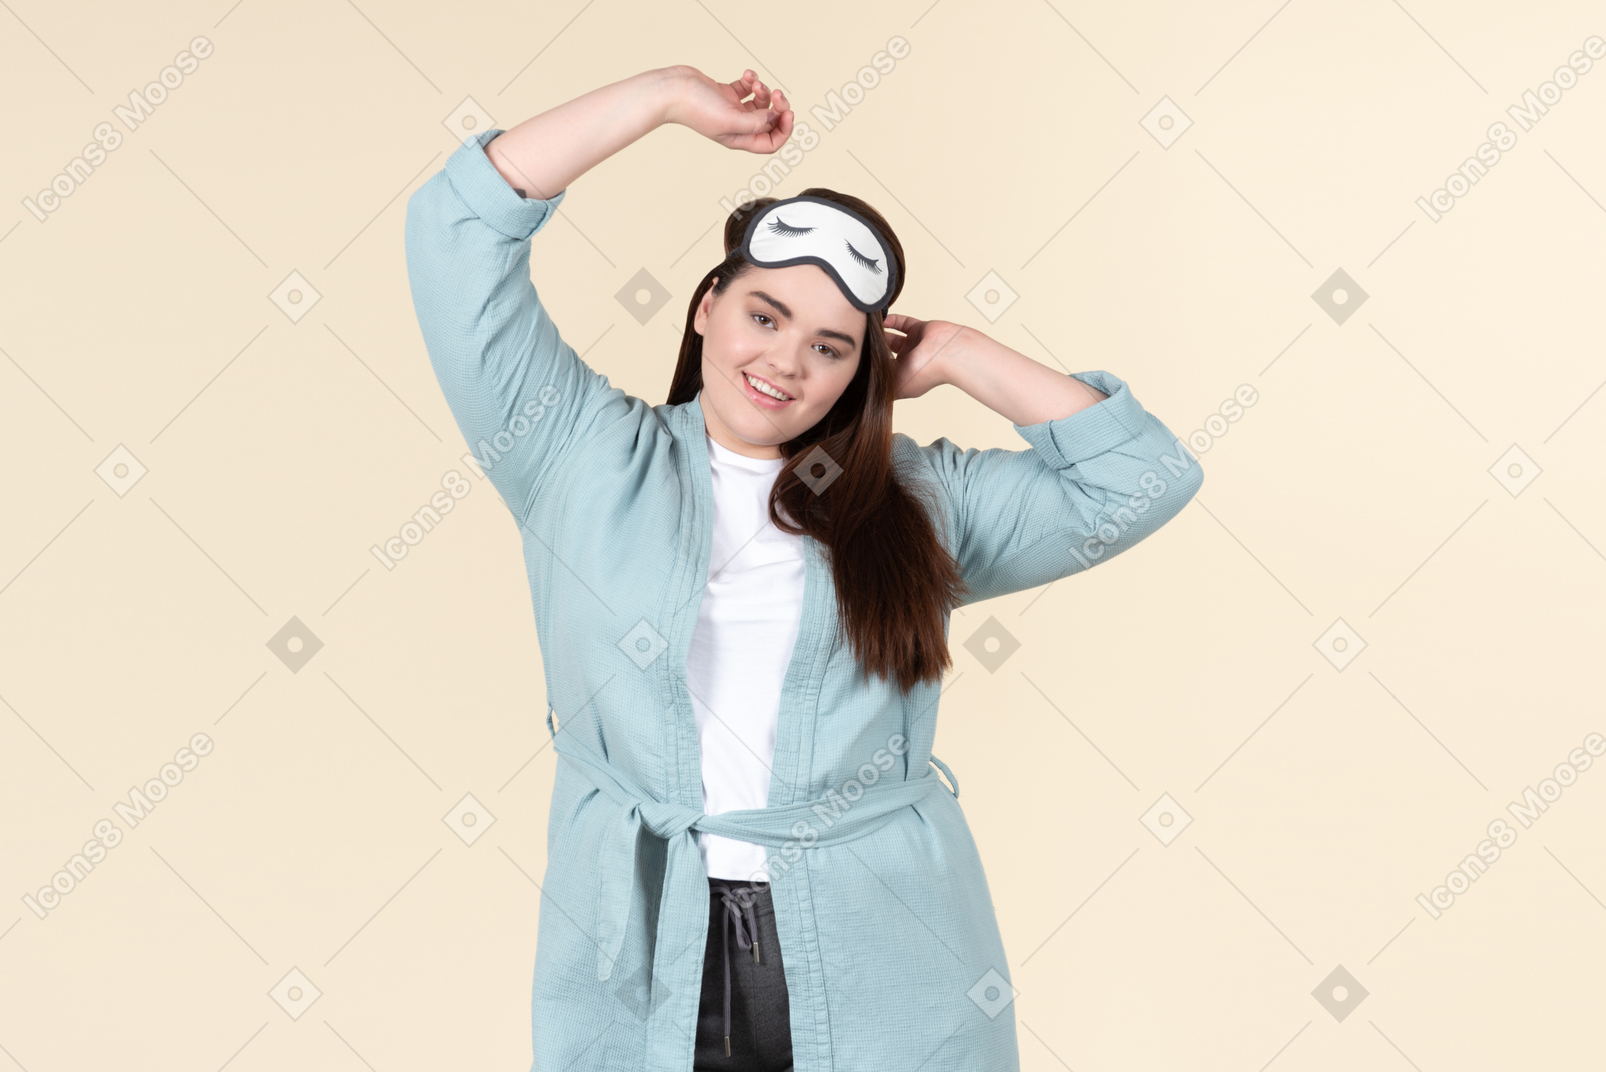 Young plus size woman in a blue bathrobe and a sleep mask on standing against a pastel yellow background, after just waking up